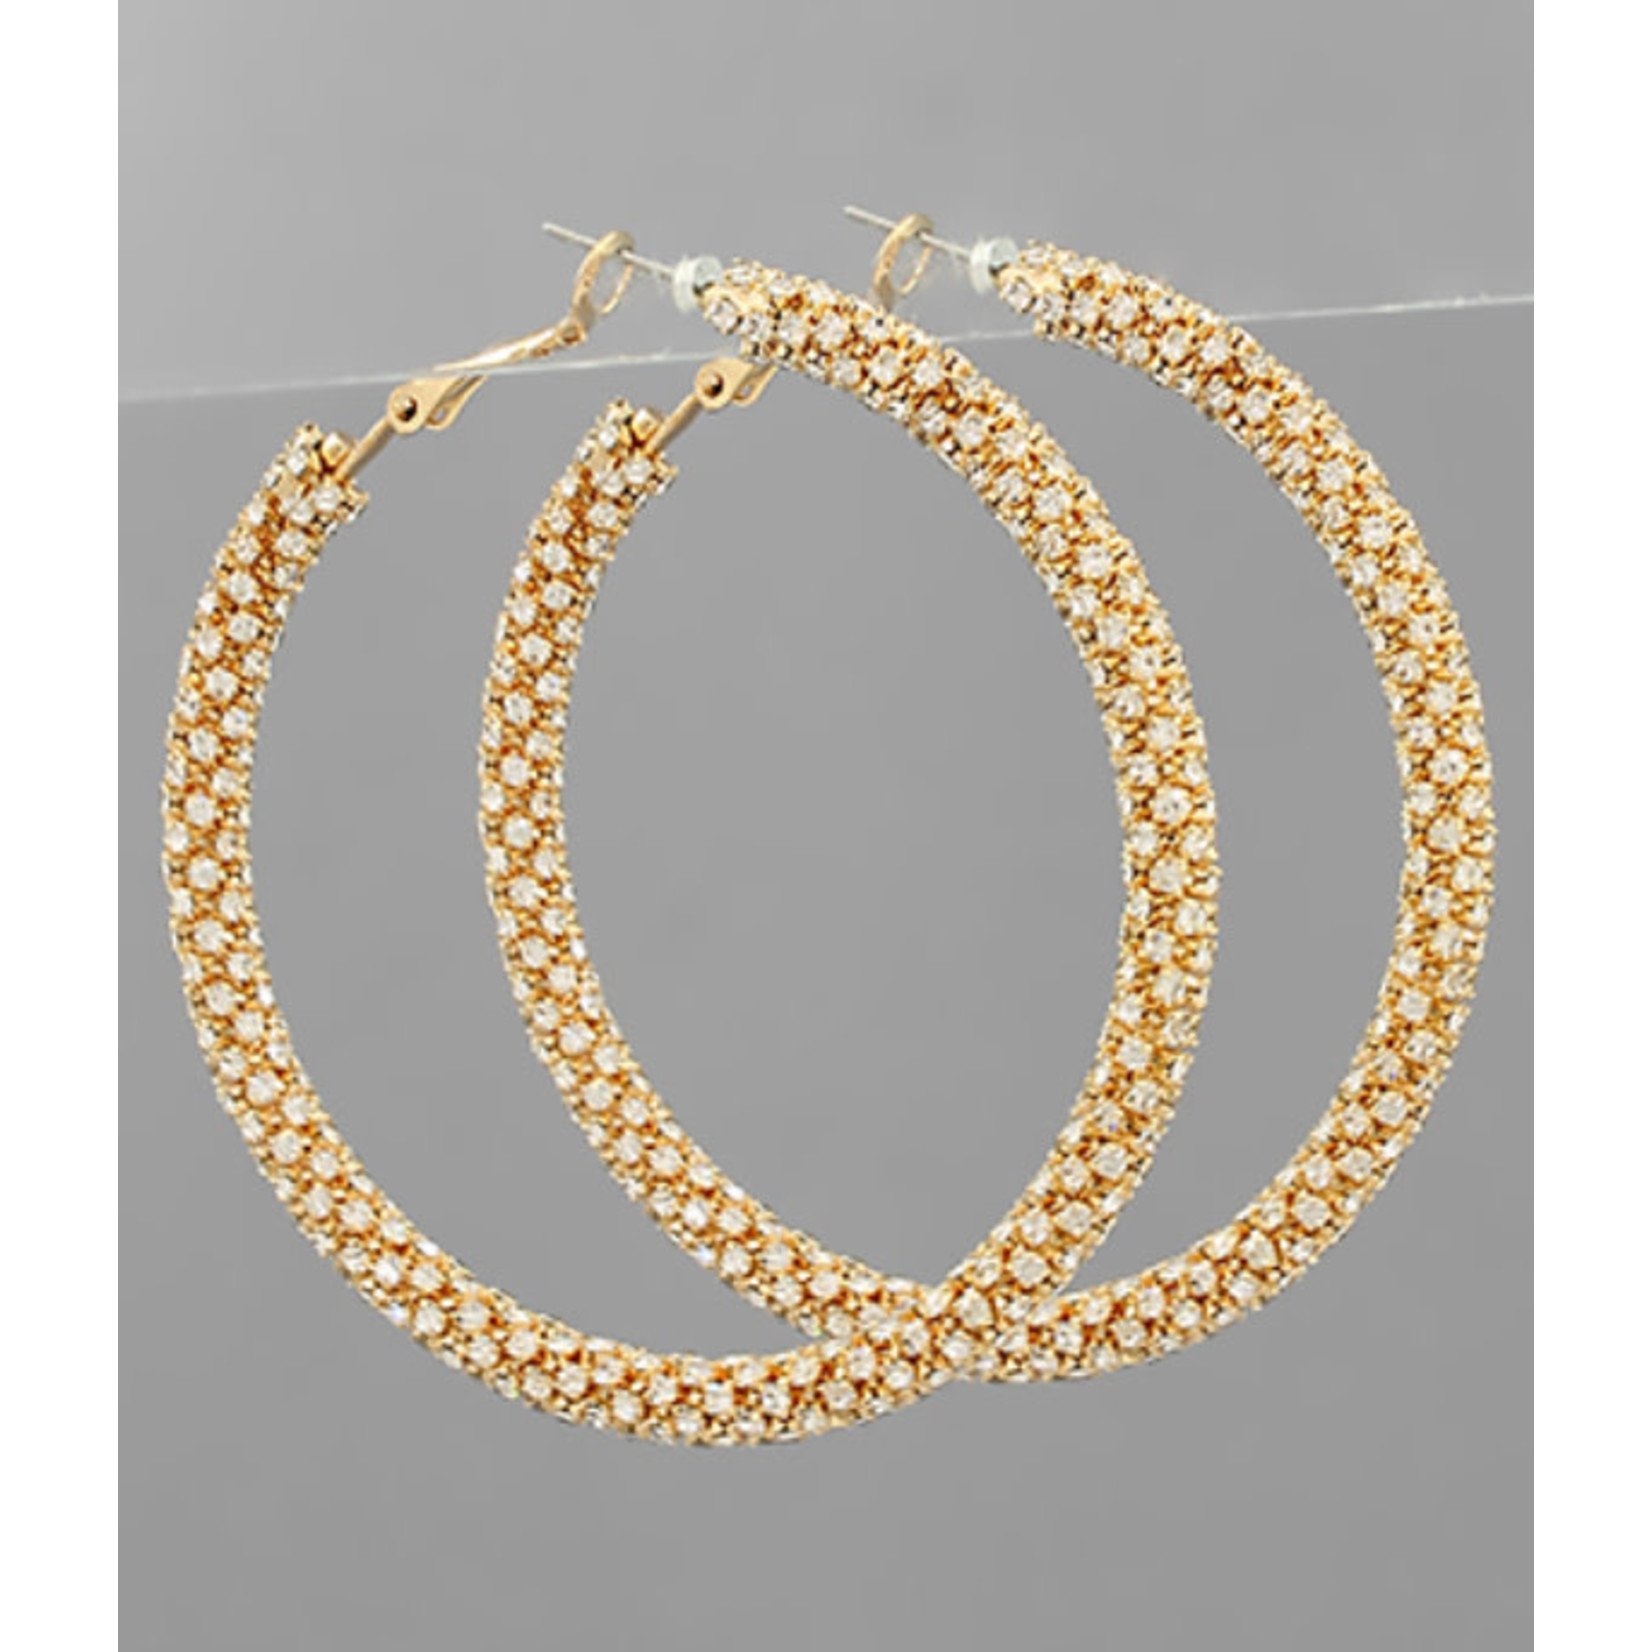 Crystal Pave Hoops/ Large/60mm